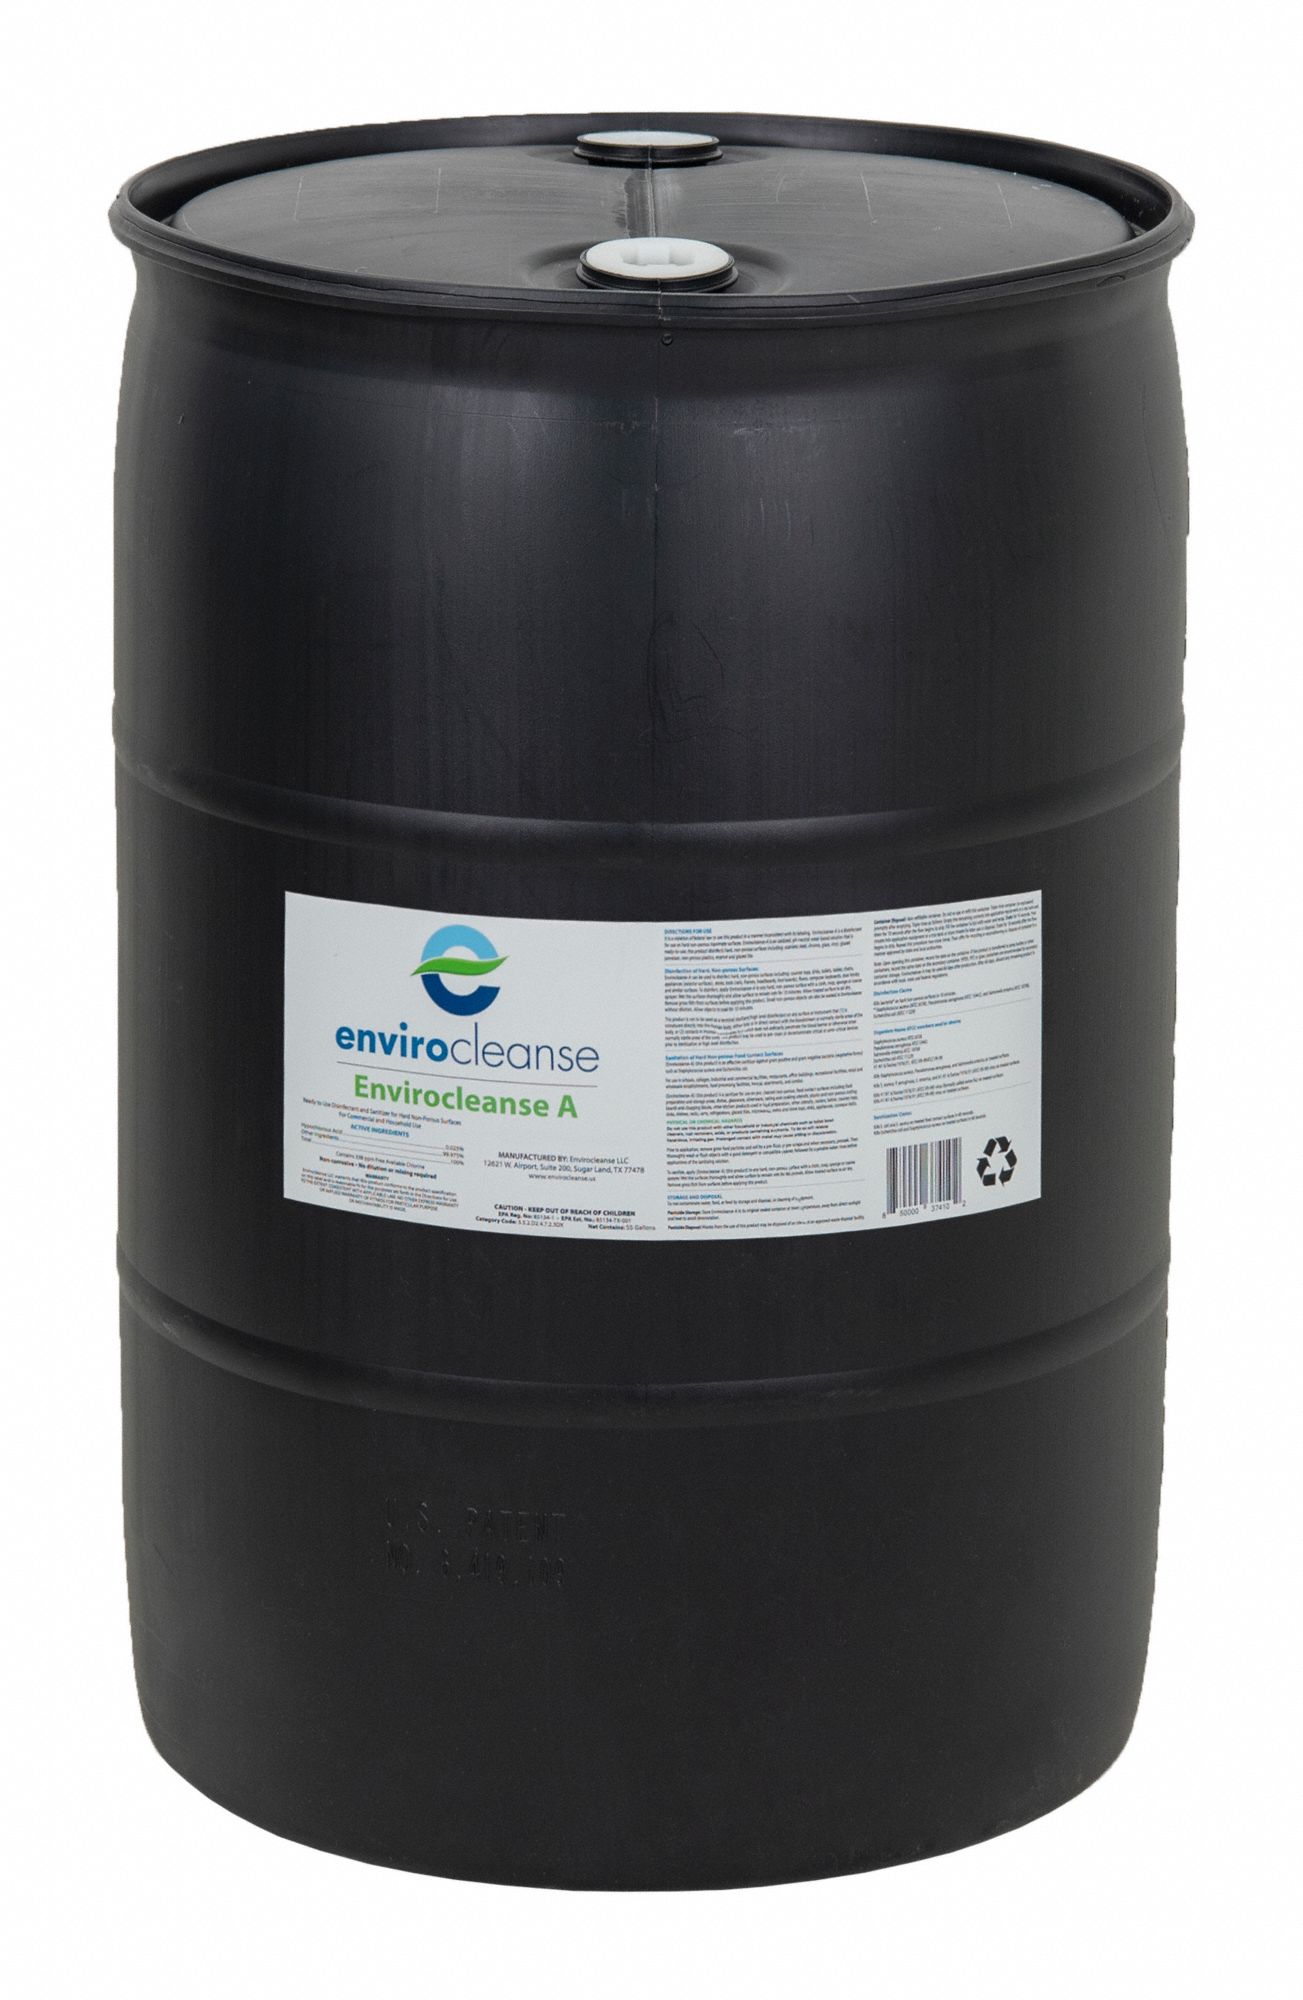 Envirocleanse-A 55 gallon drum: Drum, 55 gal Container Size, Ready to Use, Liquid